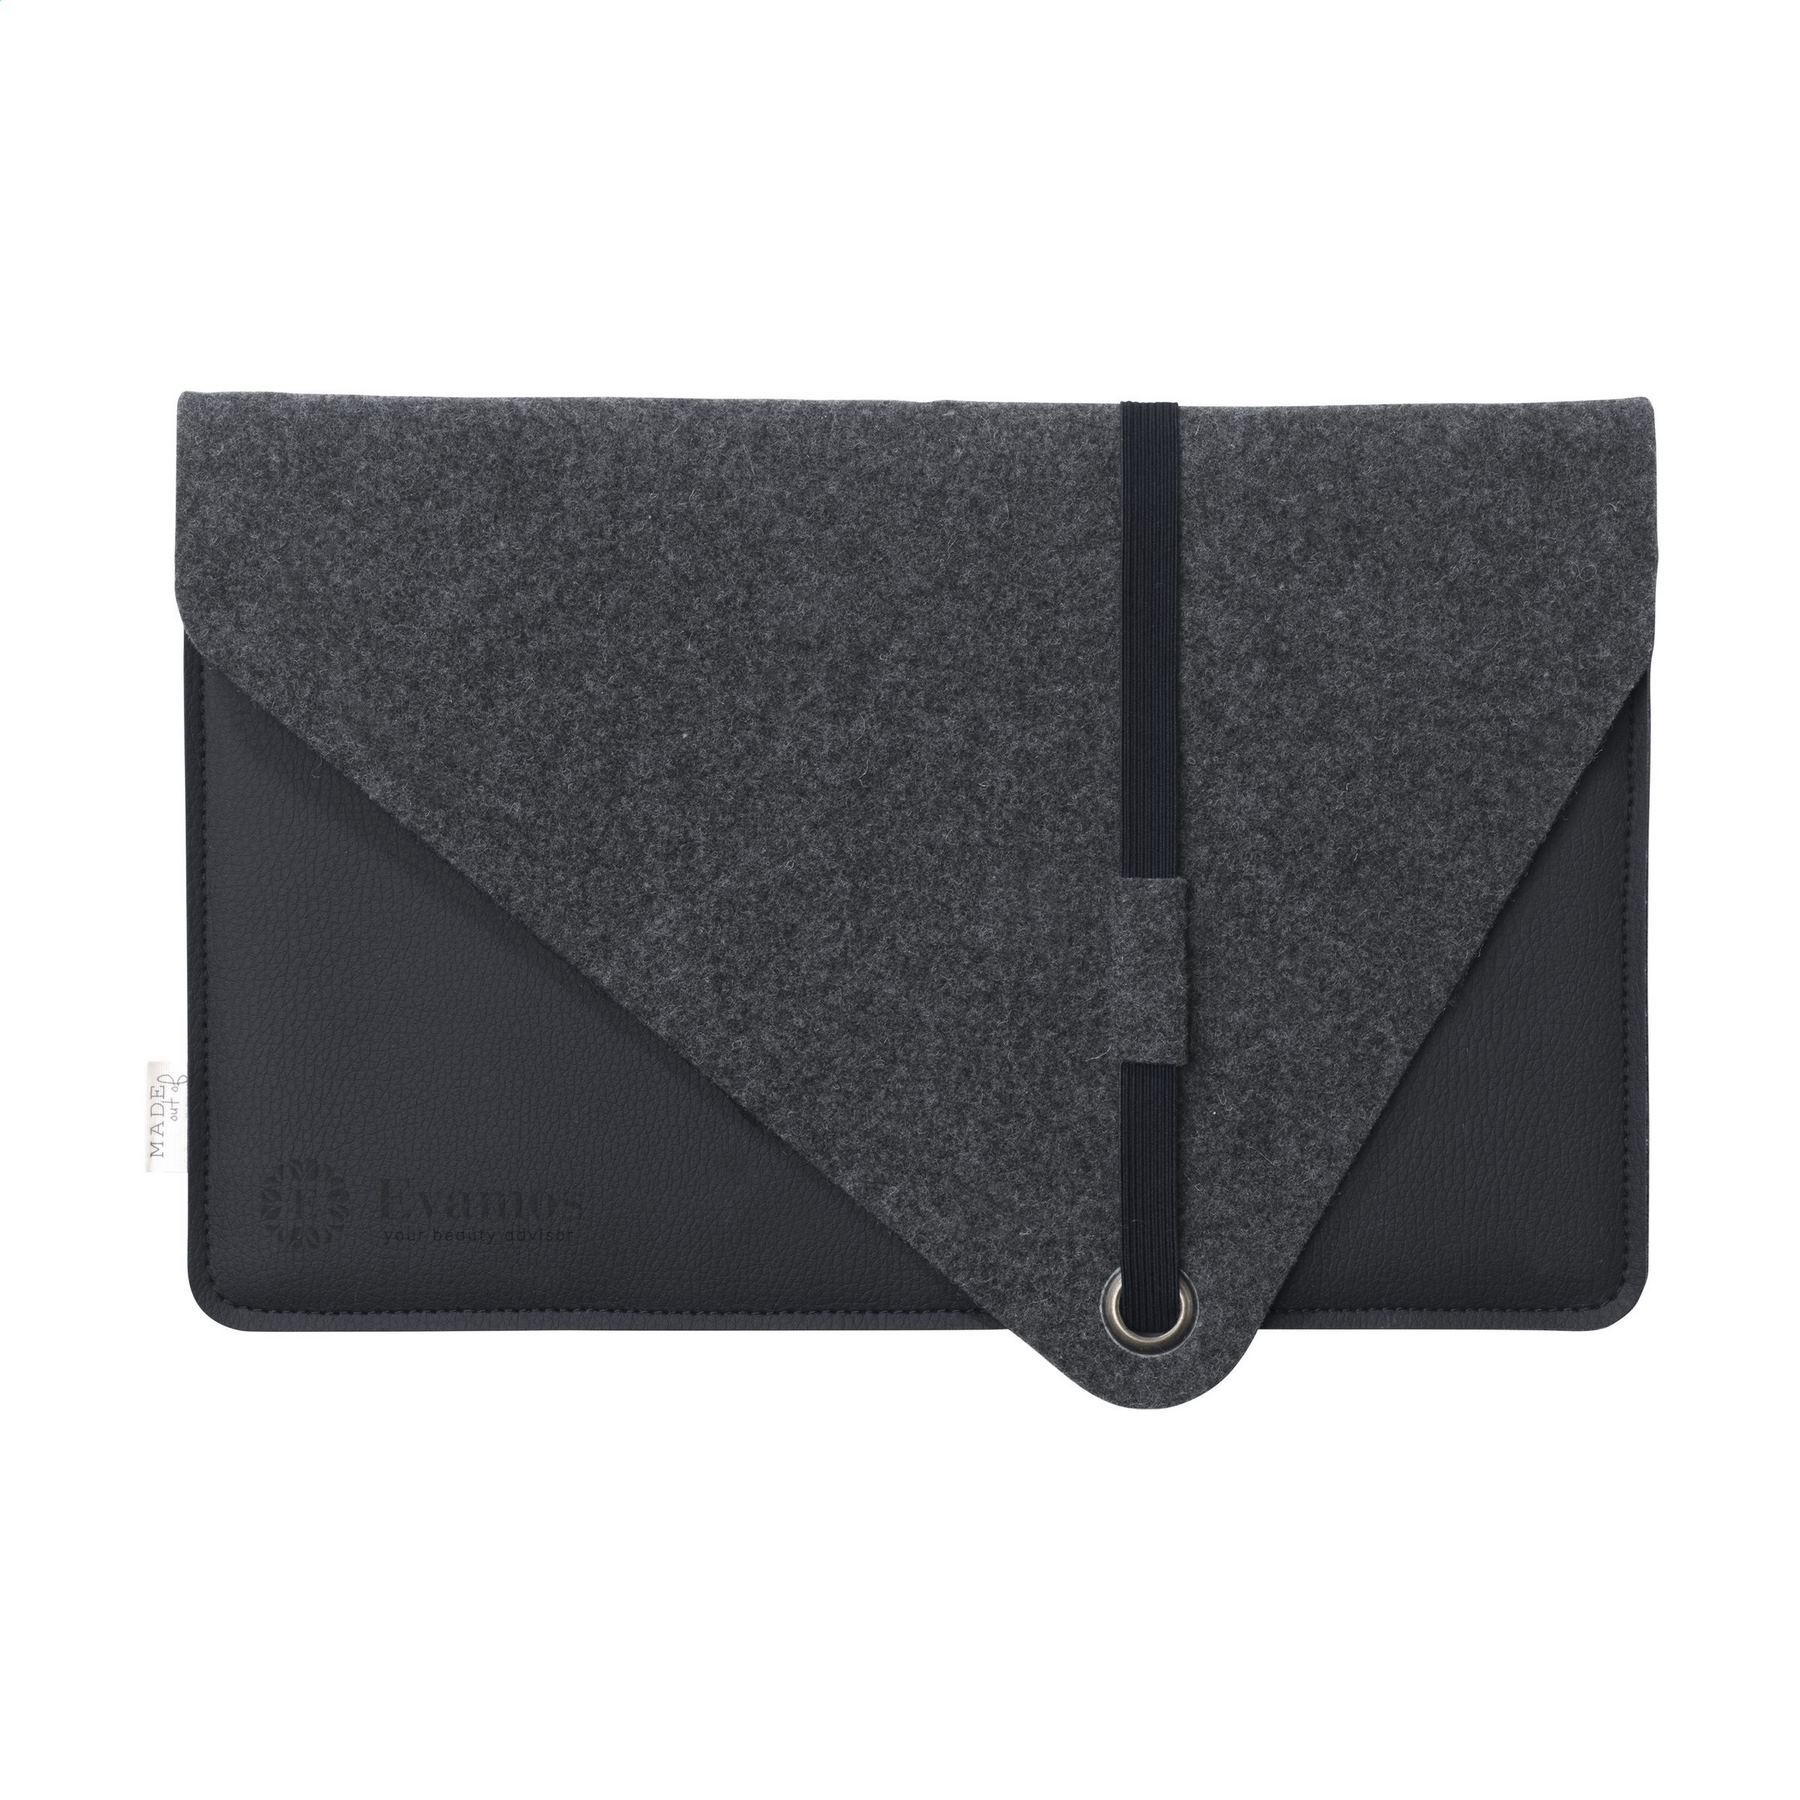 Recycled Felt & Apple Leather Laptop Sleeve 13 inch